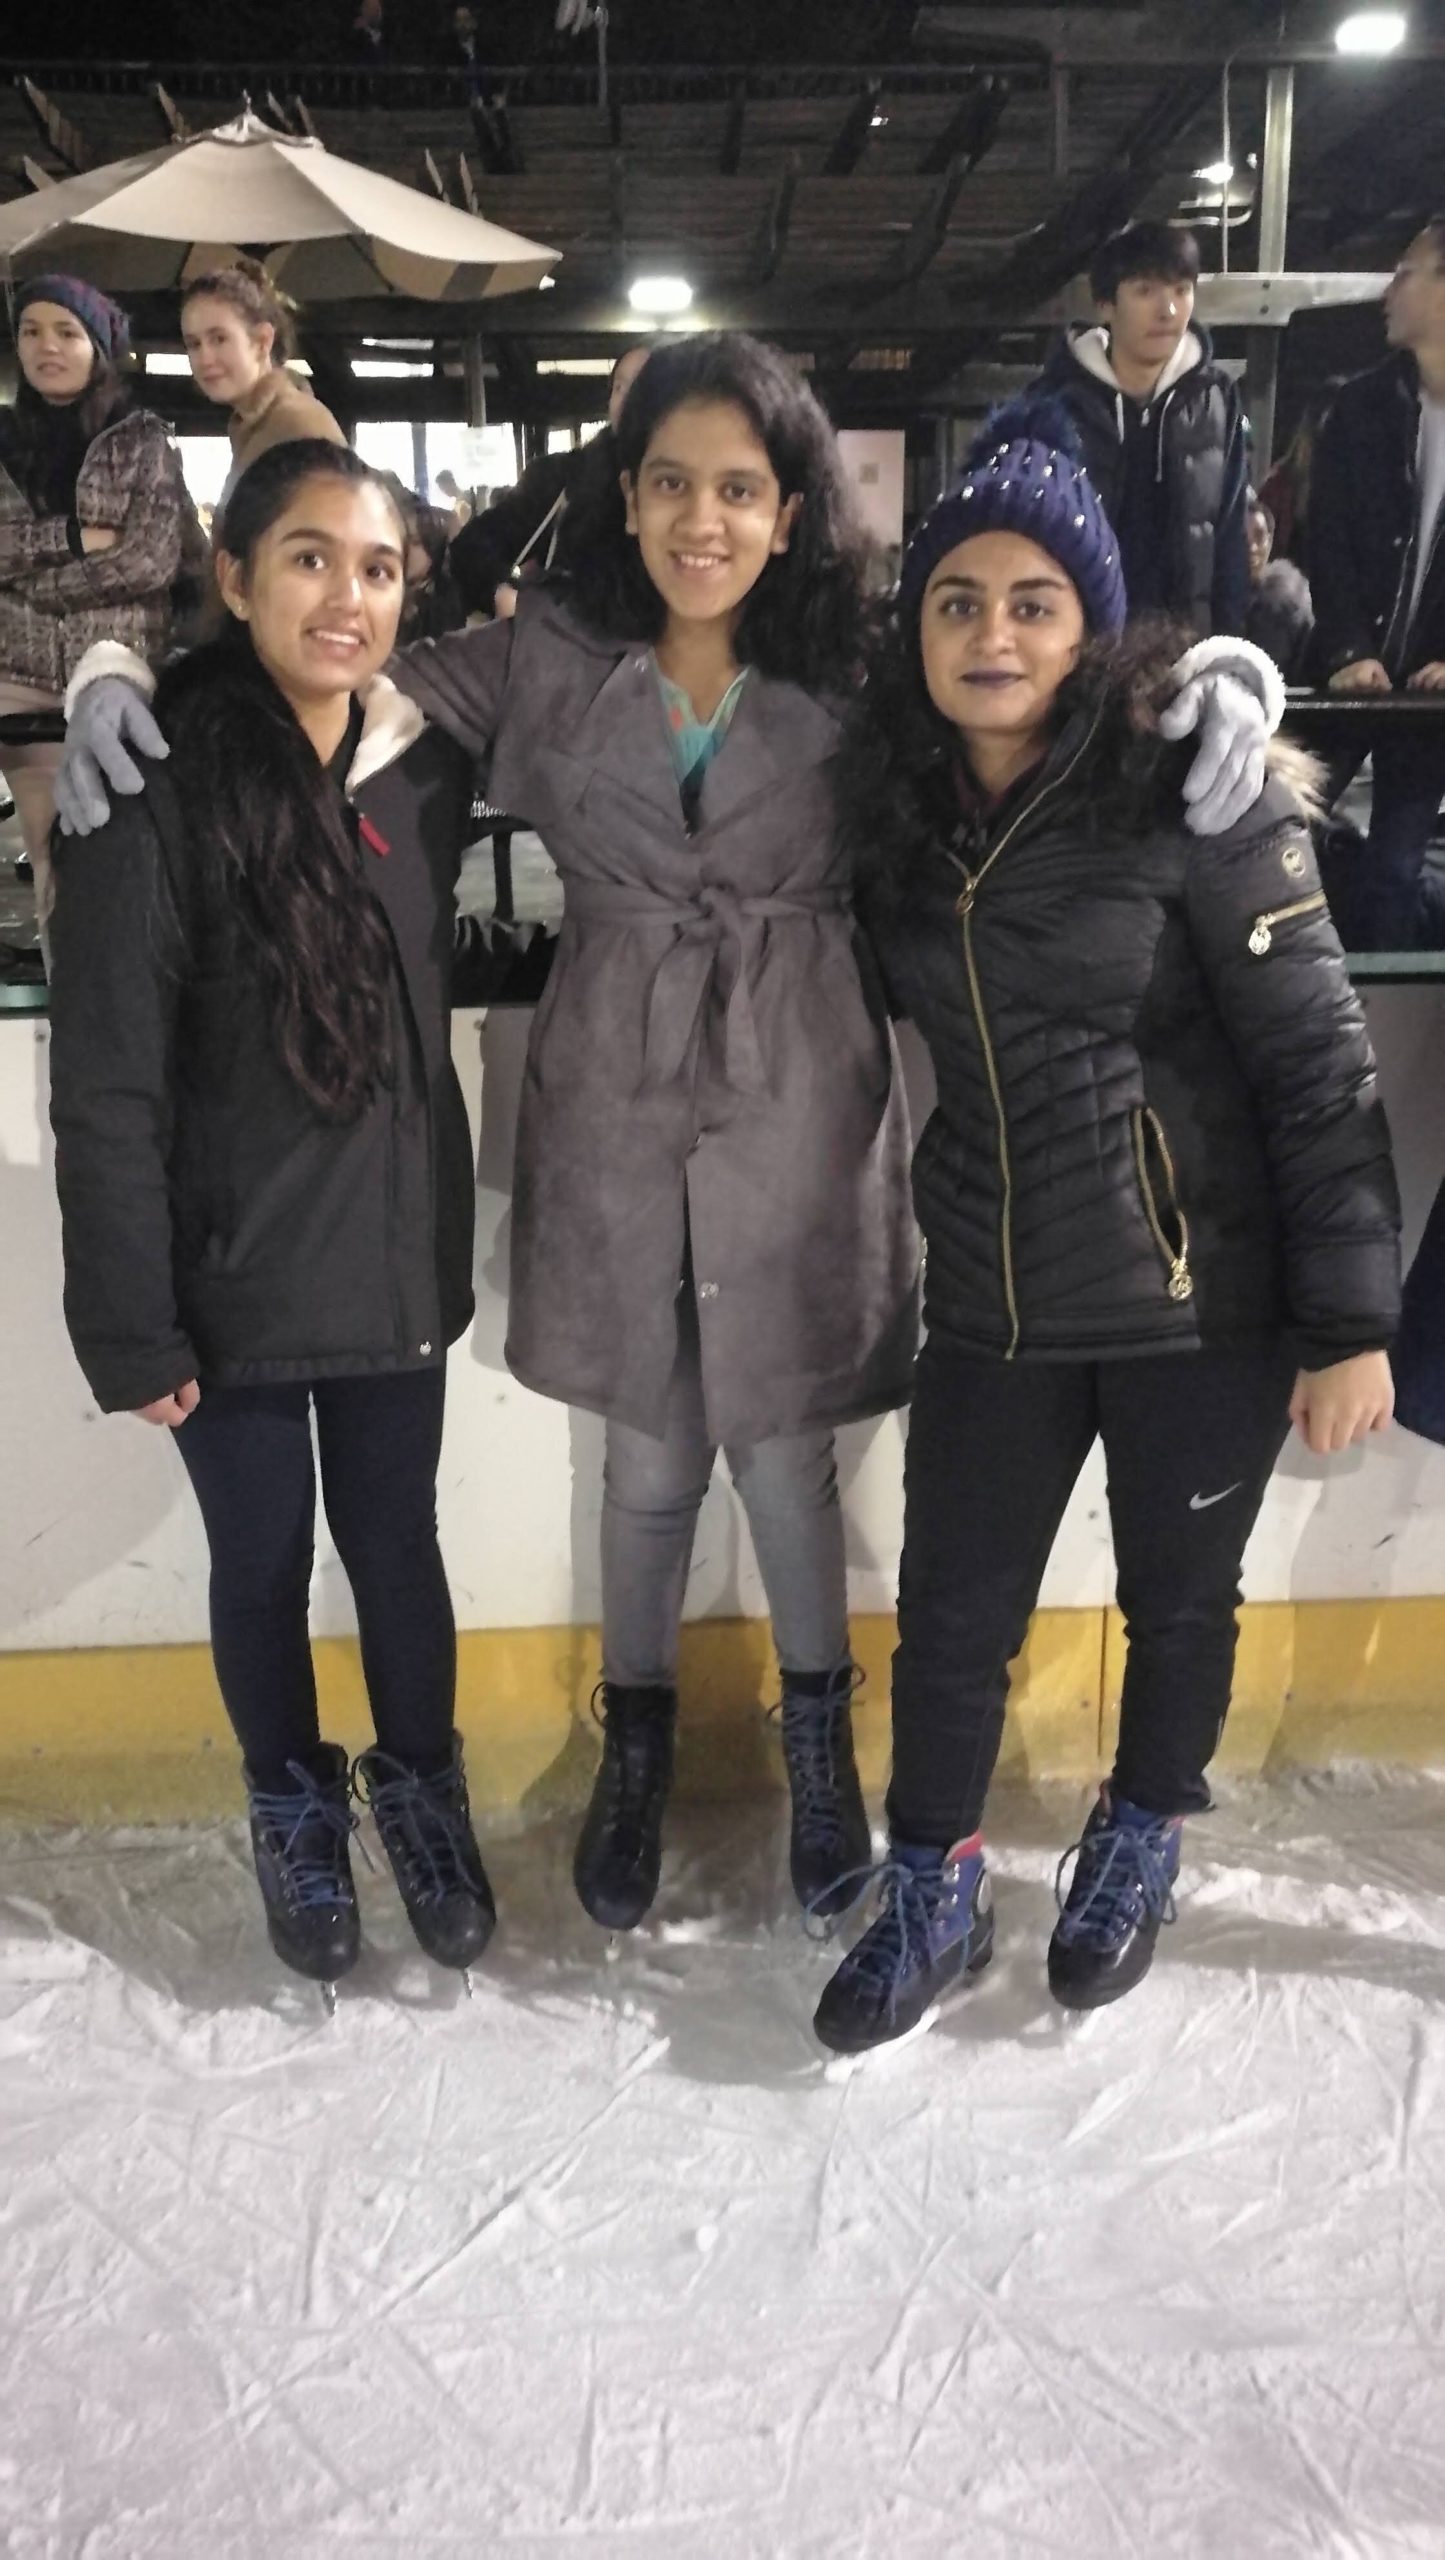 3 Girls on an Ice Rink in Ice Skates